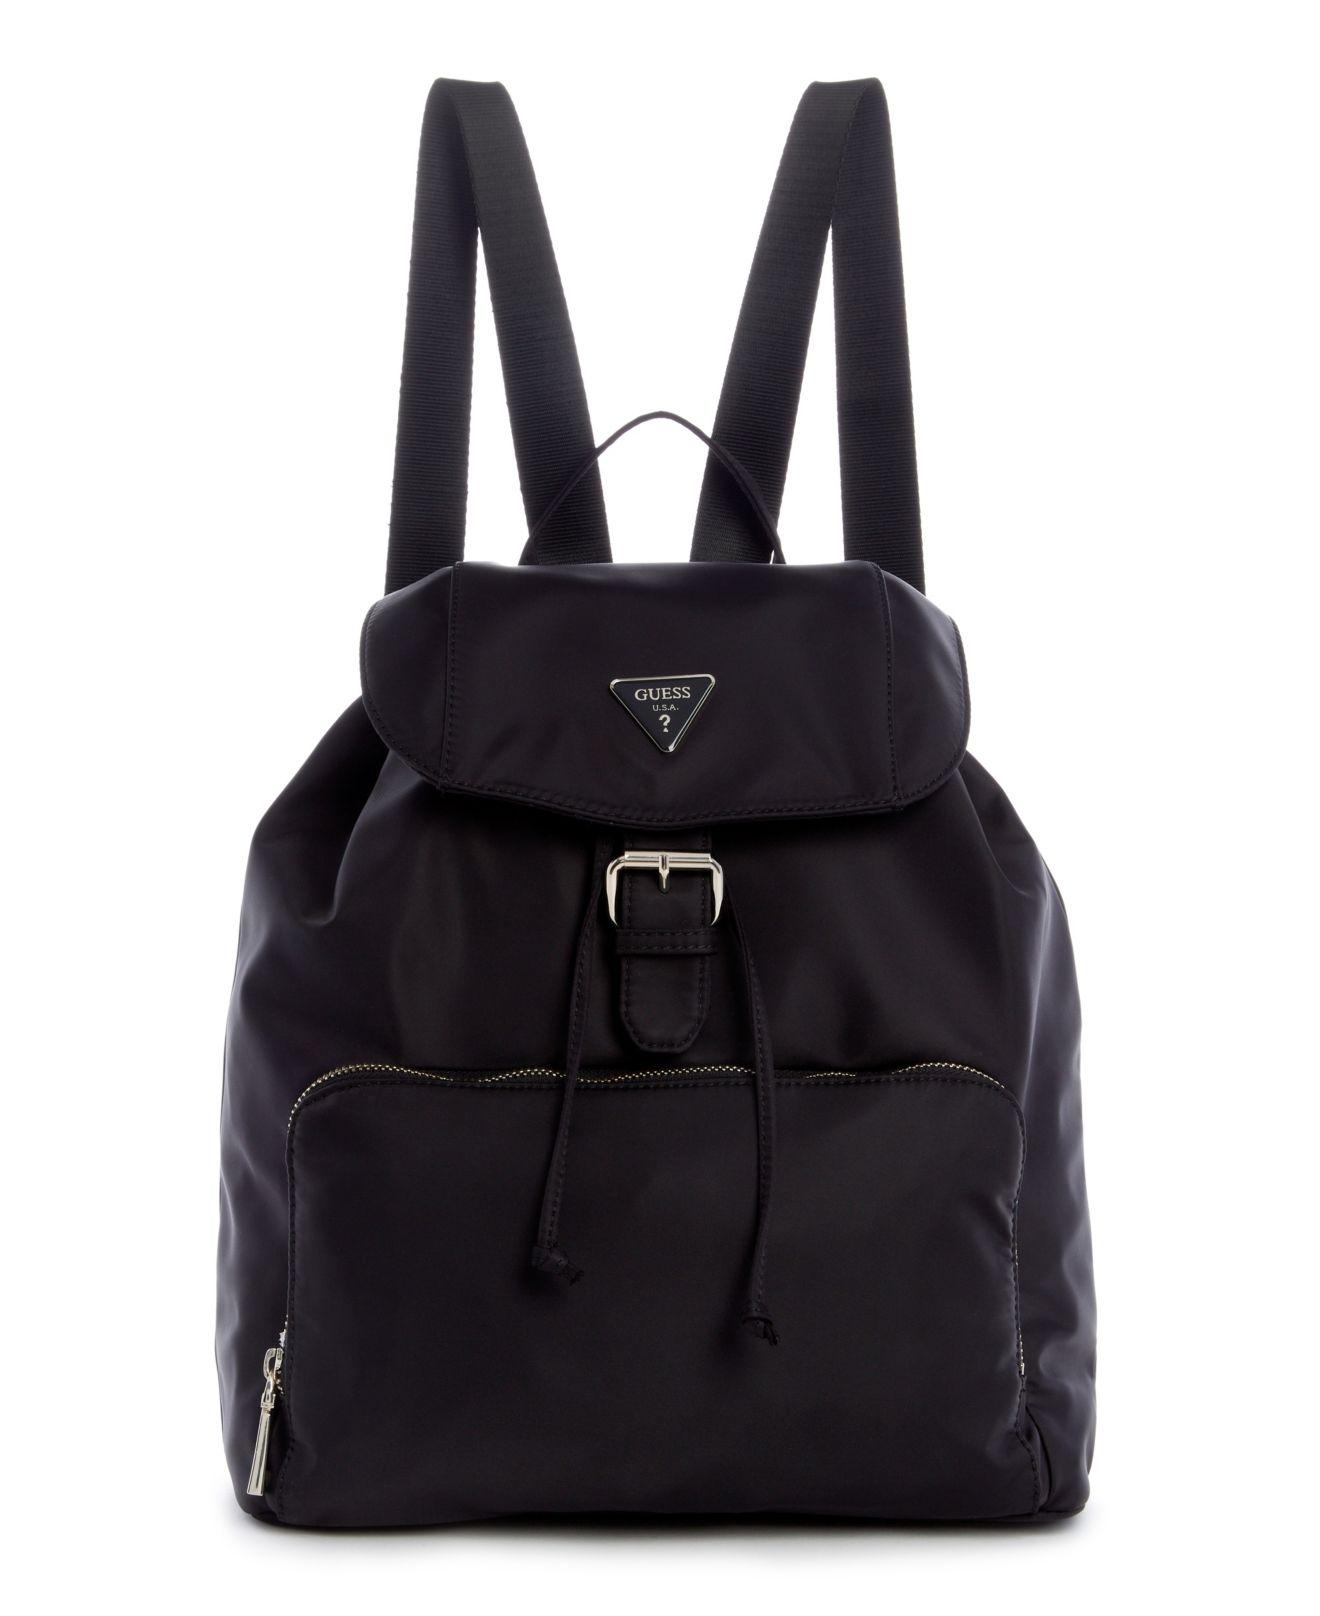 Guess Jaxi Nylon Large Backpack Macy's Exclusive in Black | Lyst